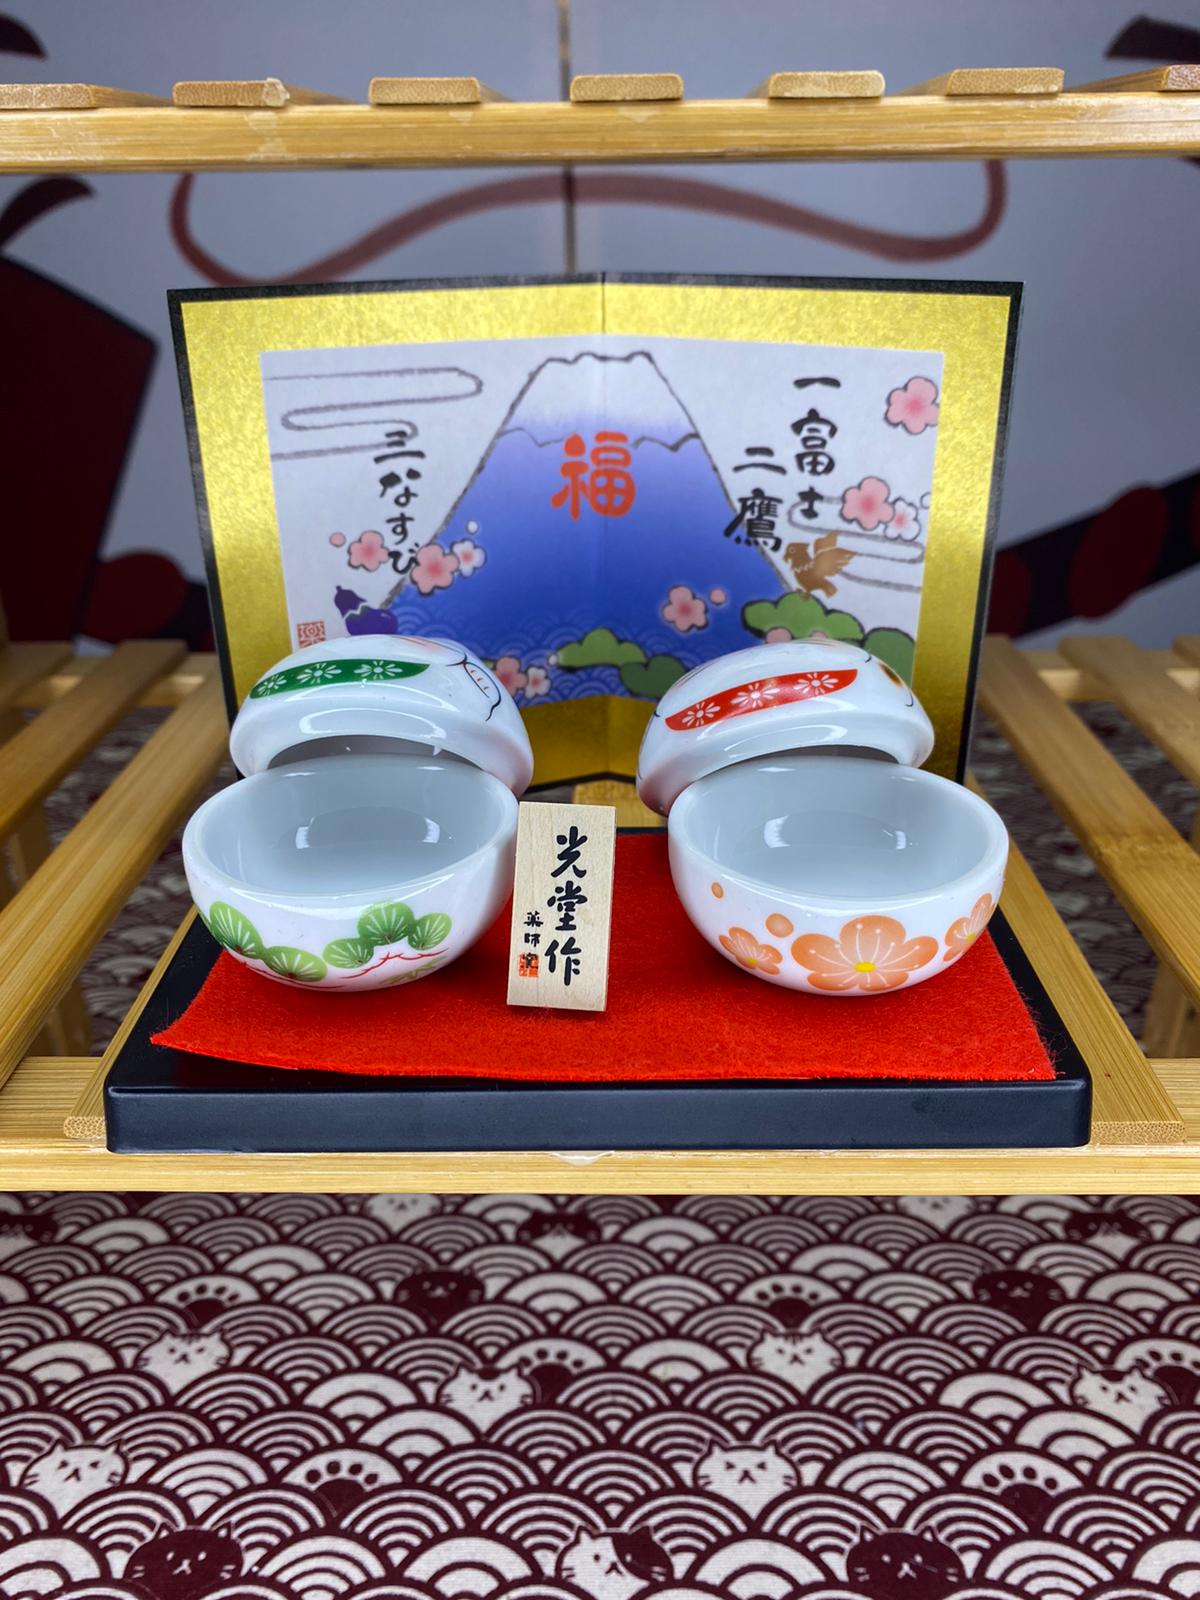 Yakushigama 药师窑 Container Fortune Cat 招财猫 w Display Stand(M)